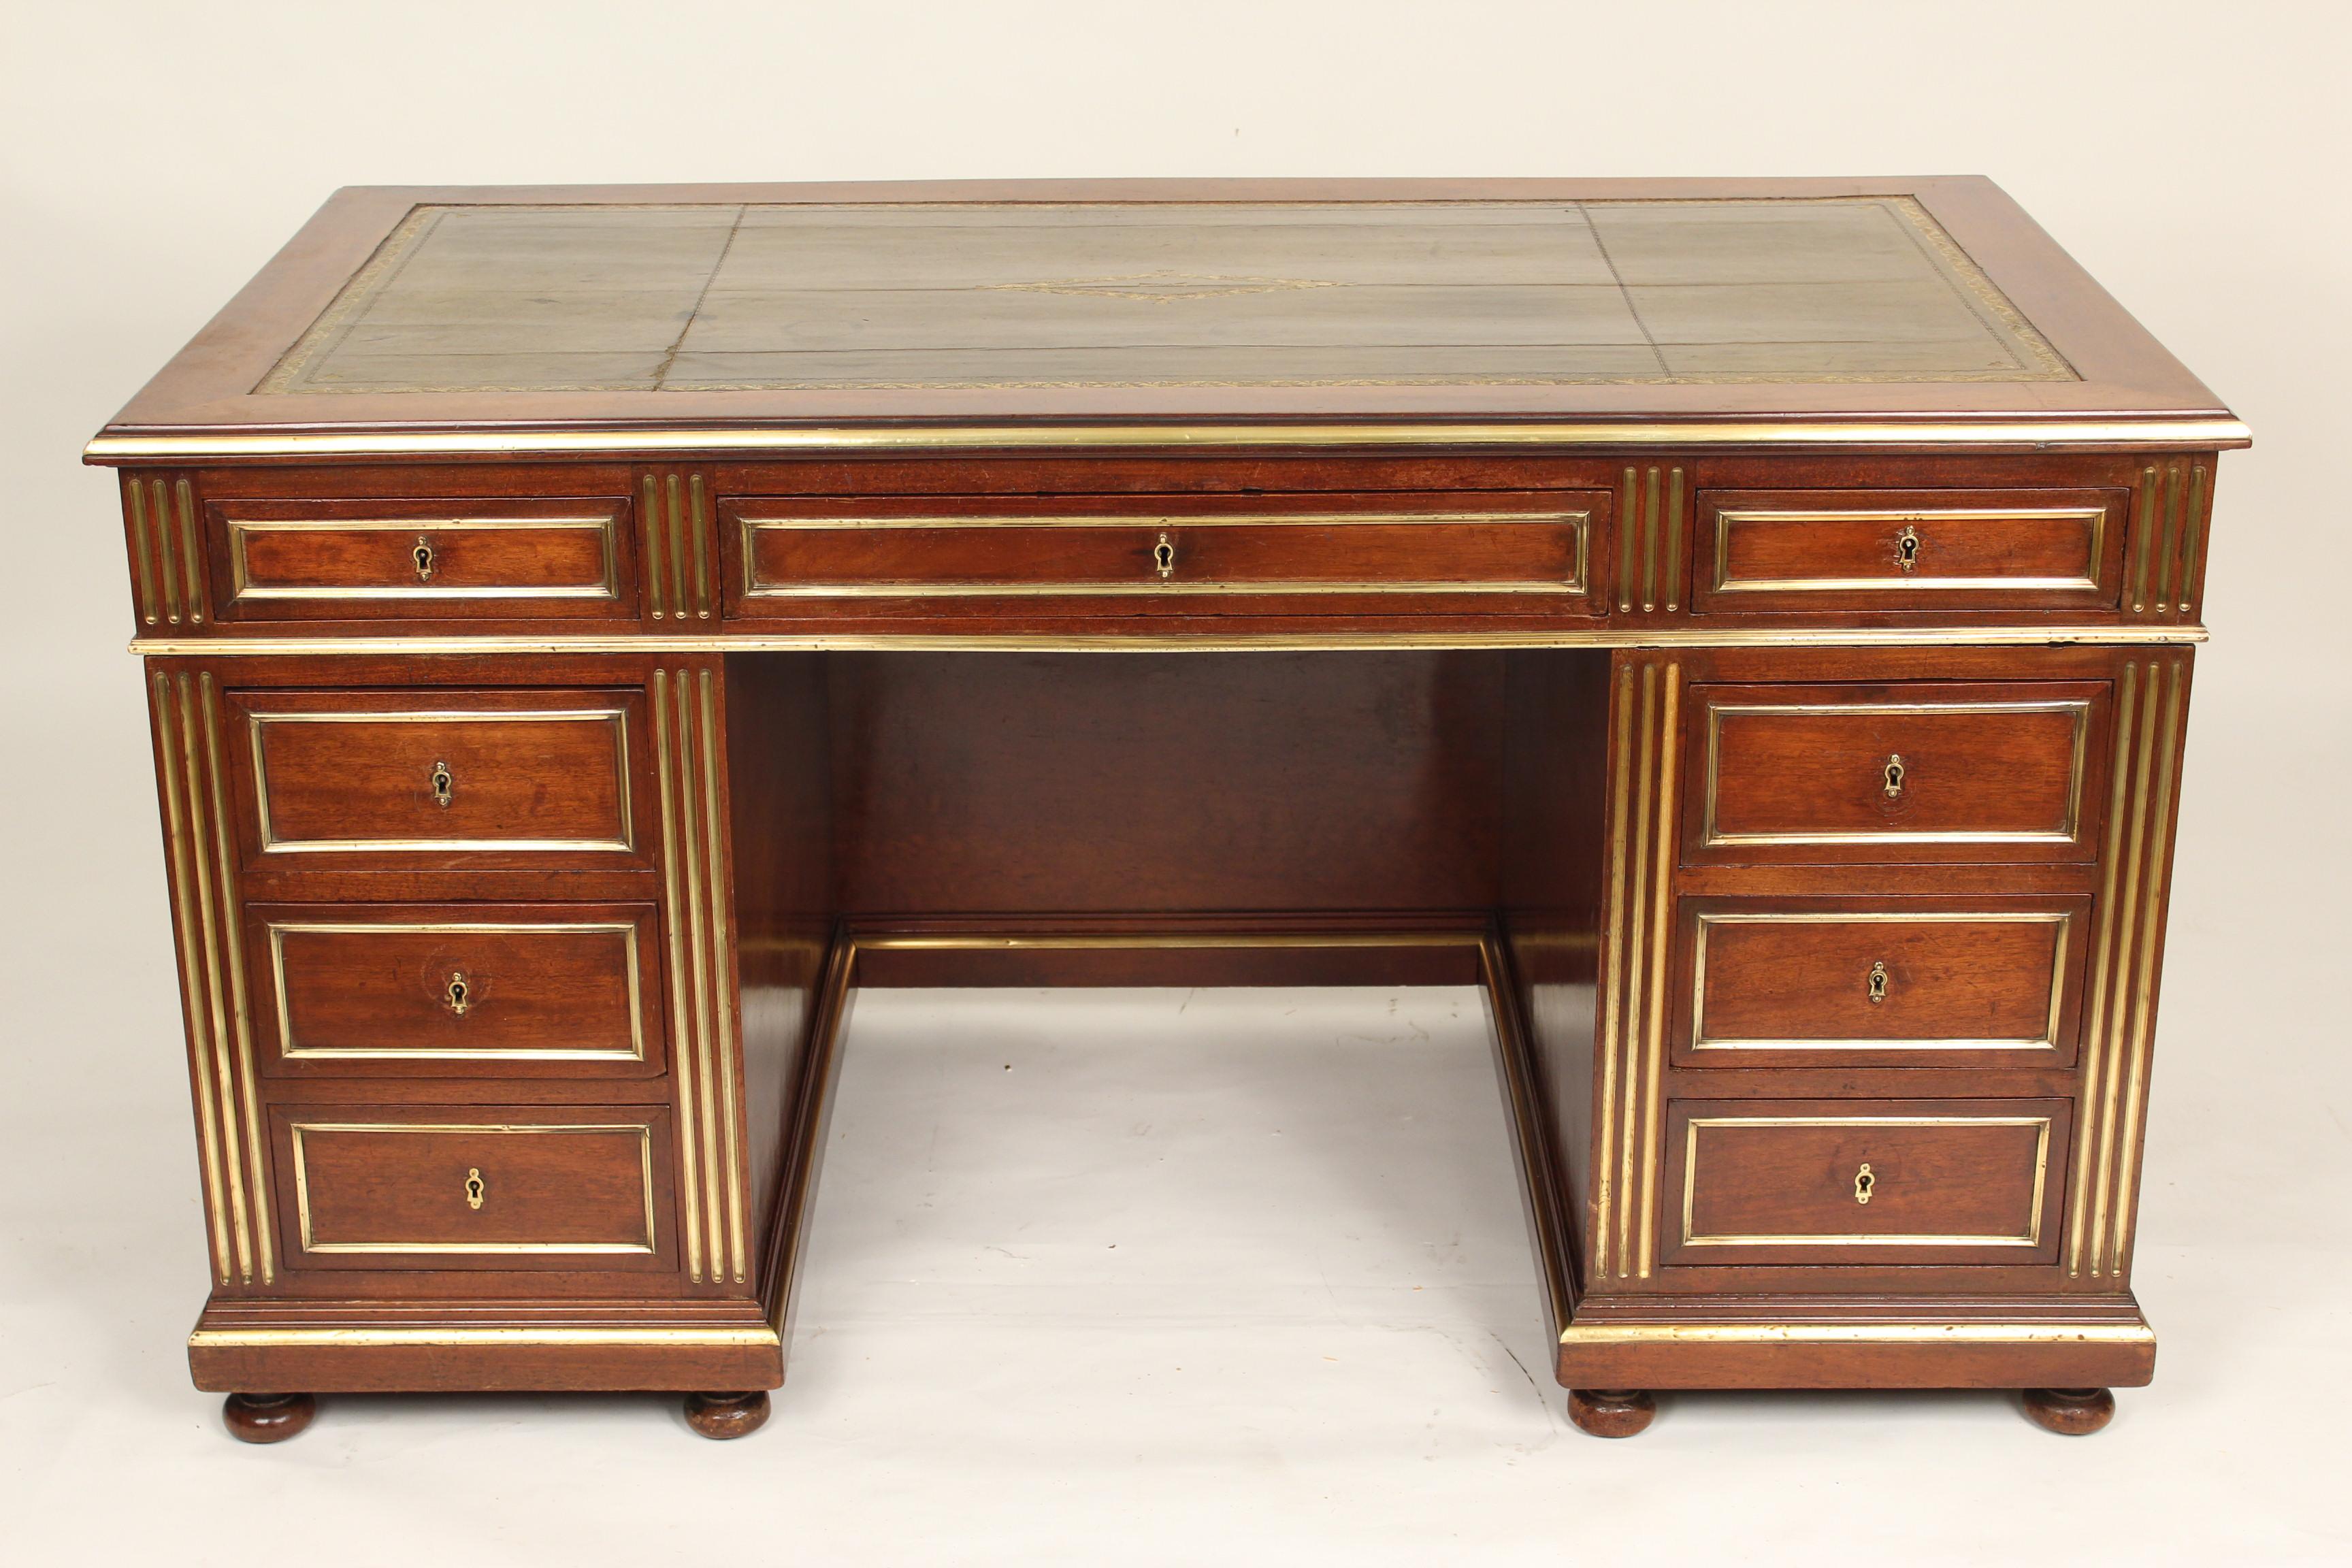 Napoleon III style mahogany double pedestal desk with brass inlay, brass moldings, tooled leather top, modesty board and pull out writing slides on each end, circa 1880.